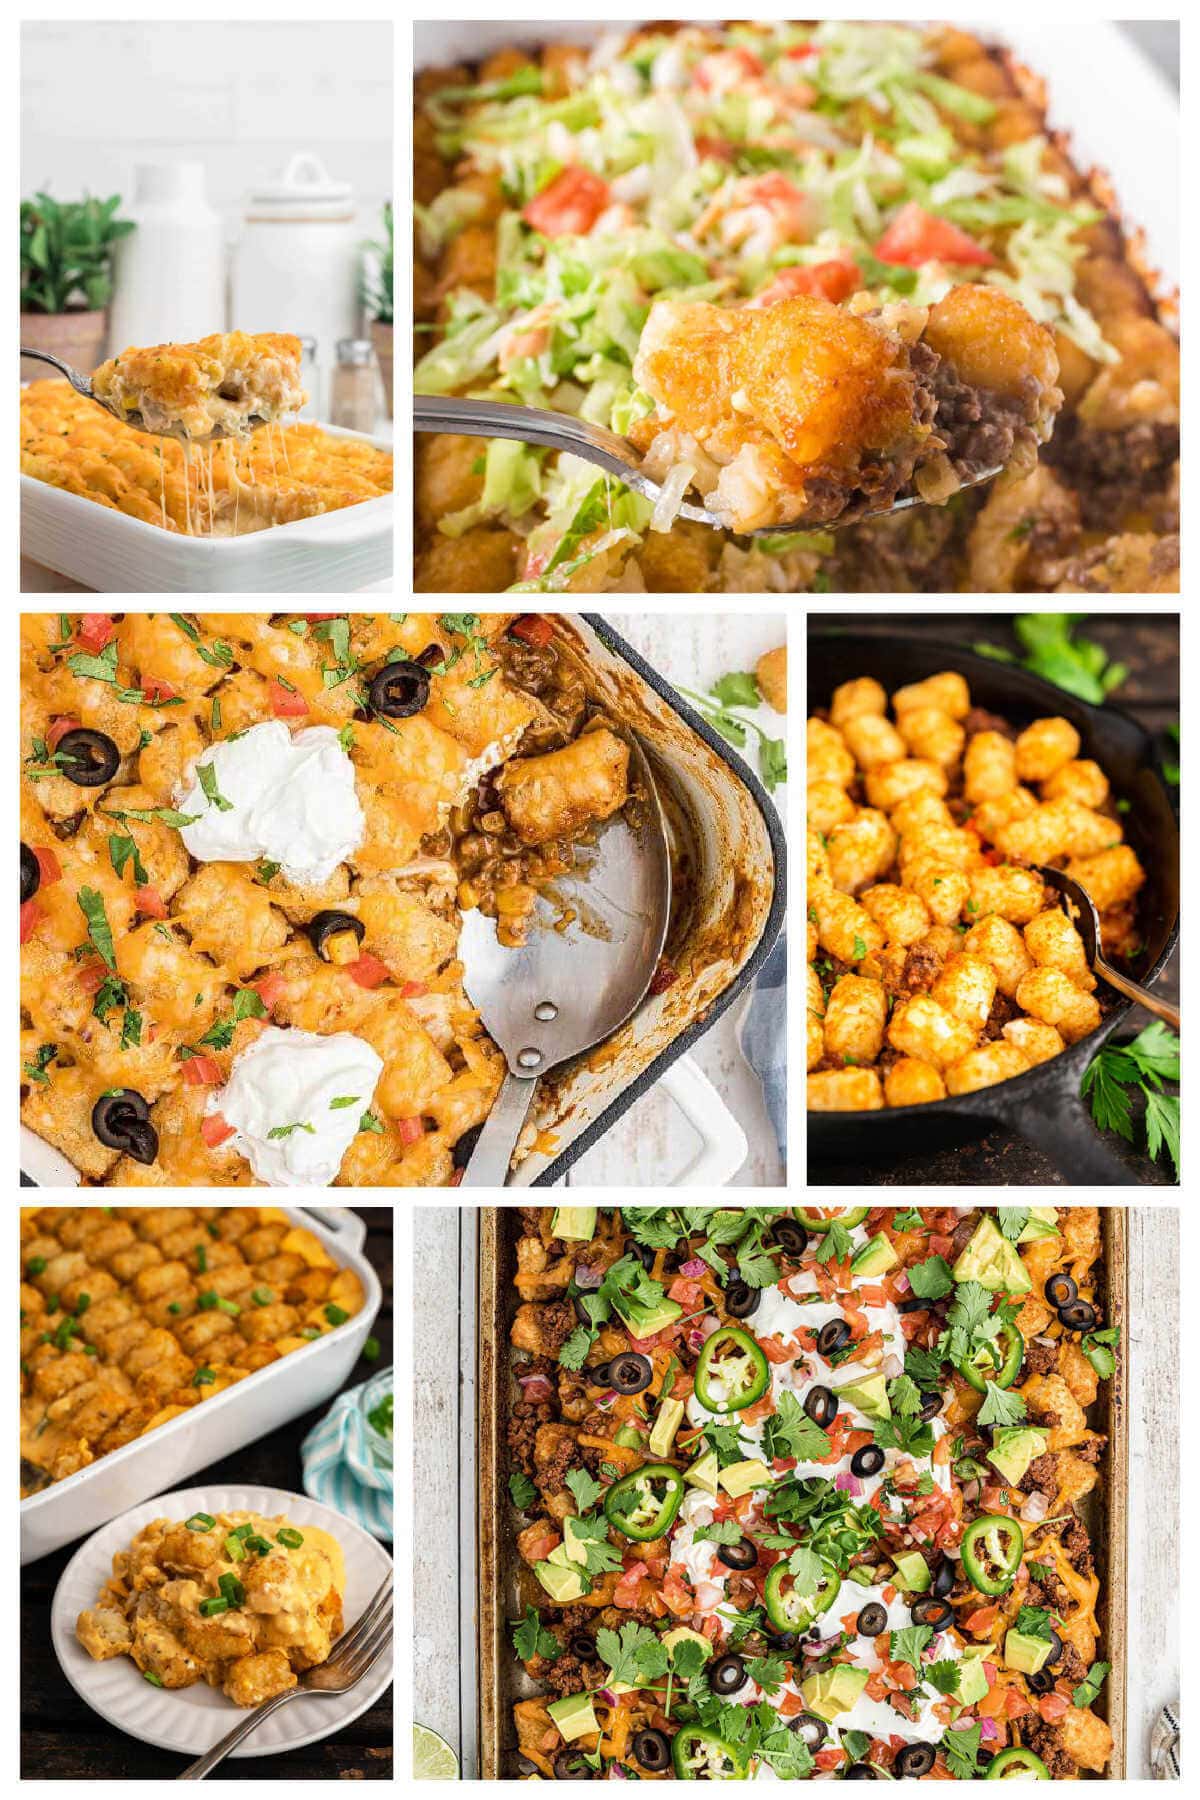 Tater tot casserole recipes in baking dishes, on a plate, and on a sheet pan.